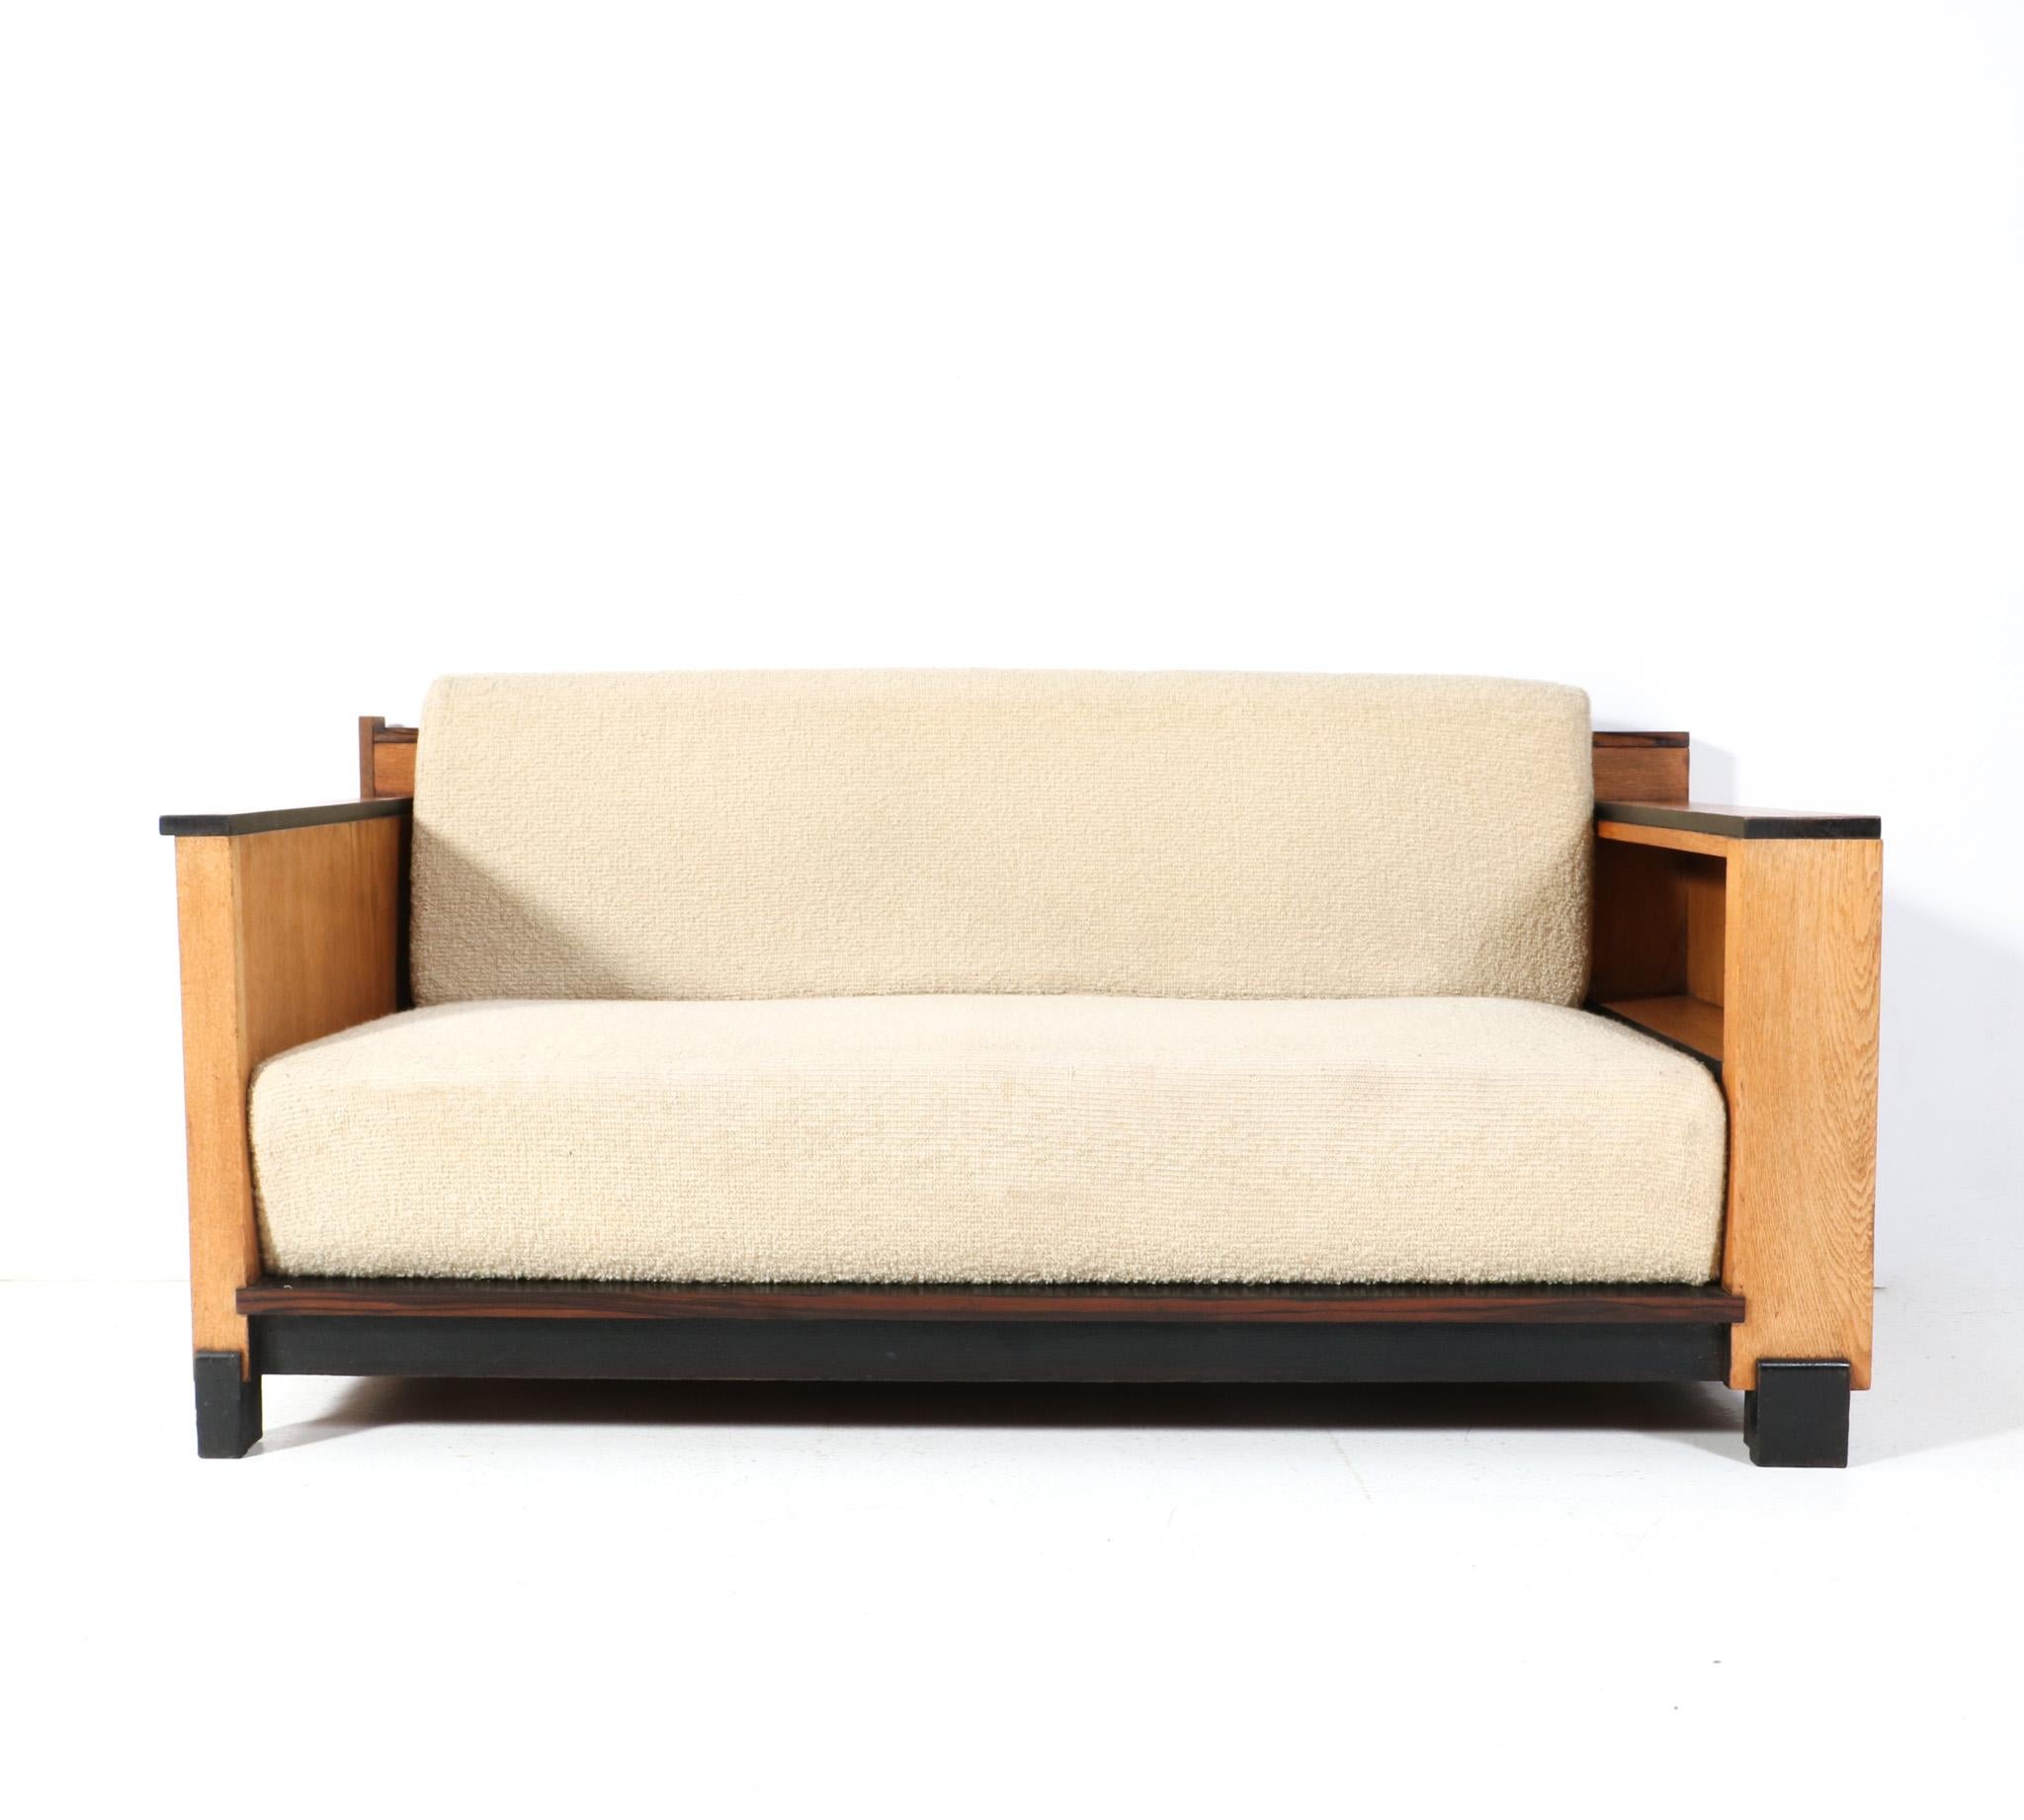 Stunning and rare Art Deco Modernist bench or sofa.
Striking Dutch design from the 1920s.
Solid oak and oak veneered frame with re-upholstered seat and back cushion, this was done by the former owner some ten years ago.
We can do new upholstery if